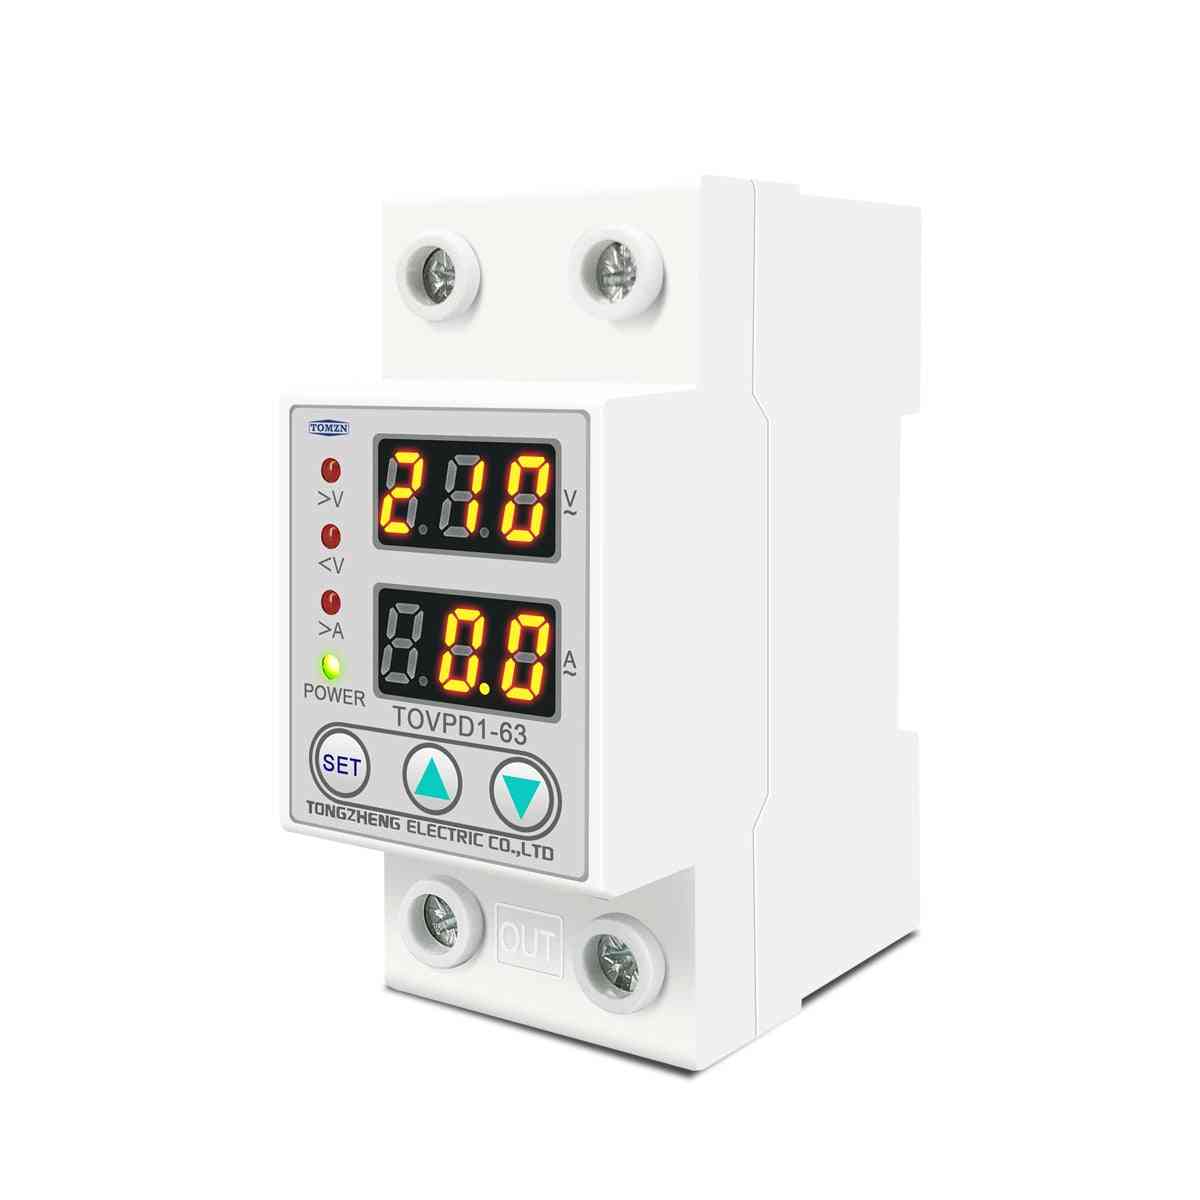 Adjustable Over & Under Voltage Protective Device Protector With Current Limiting Protection Voltmeter